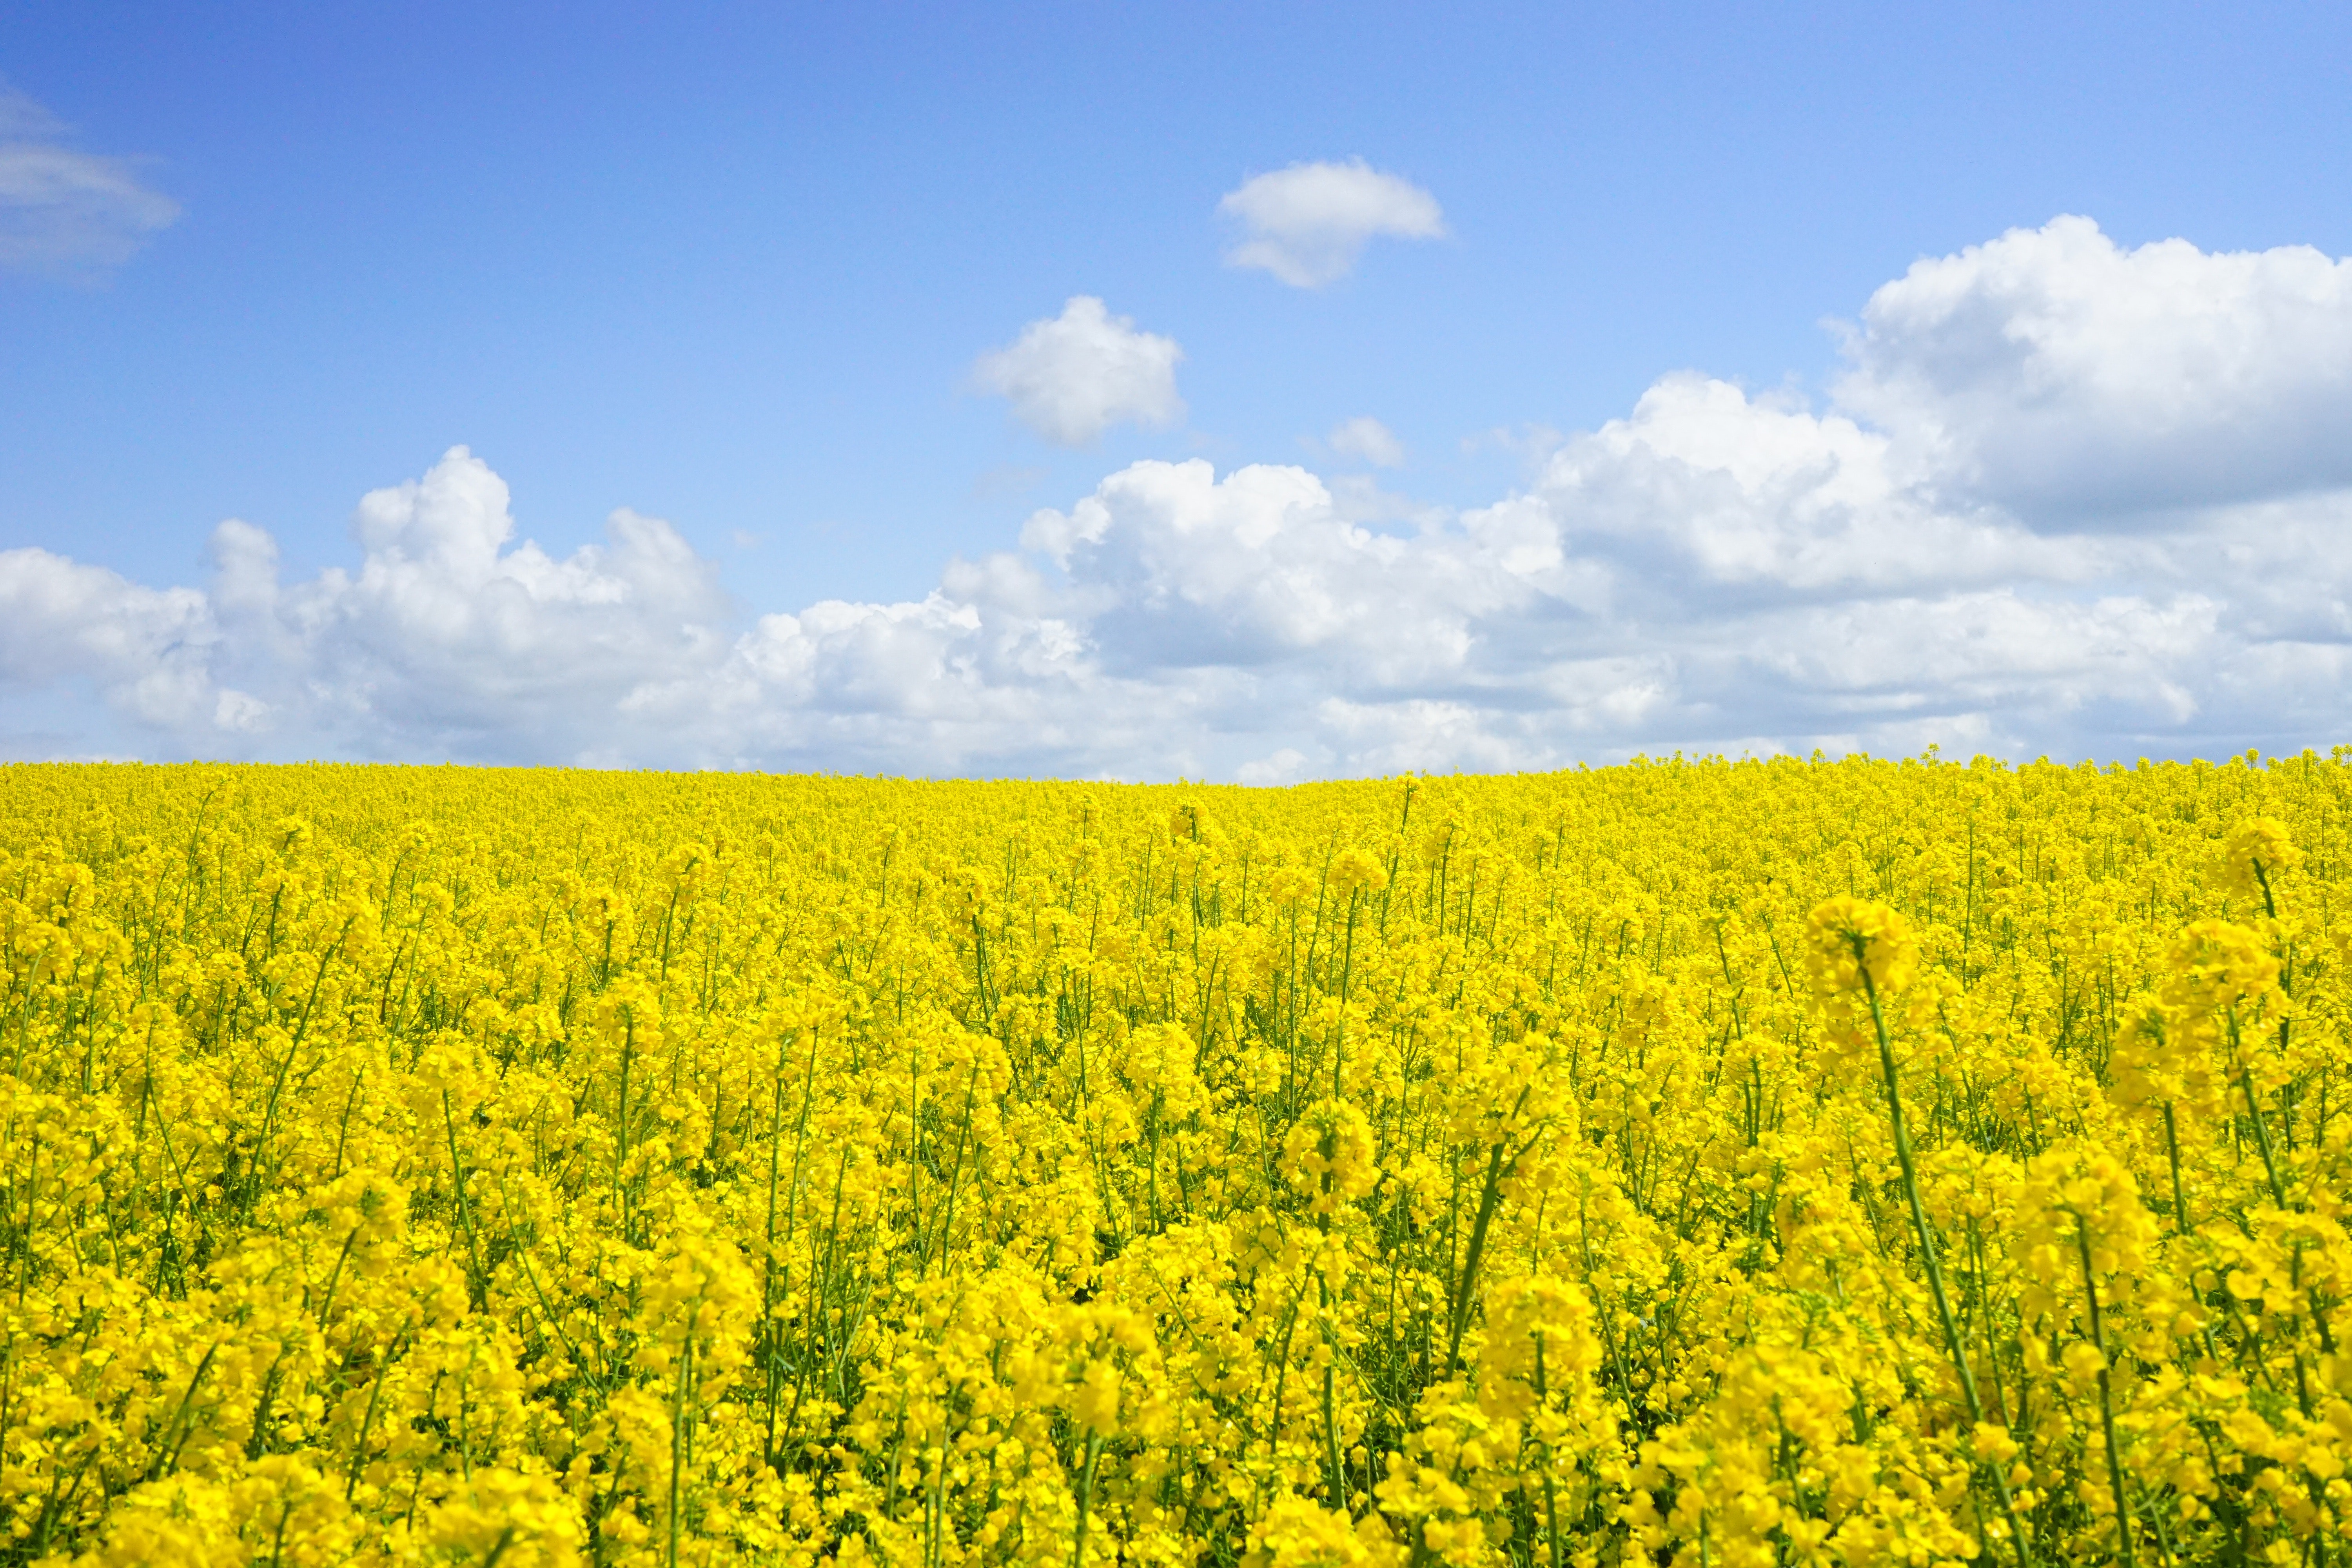 Yellow flower field under blue cloudy sky during daytime photo